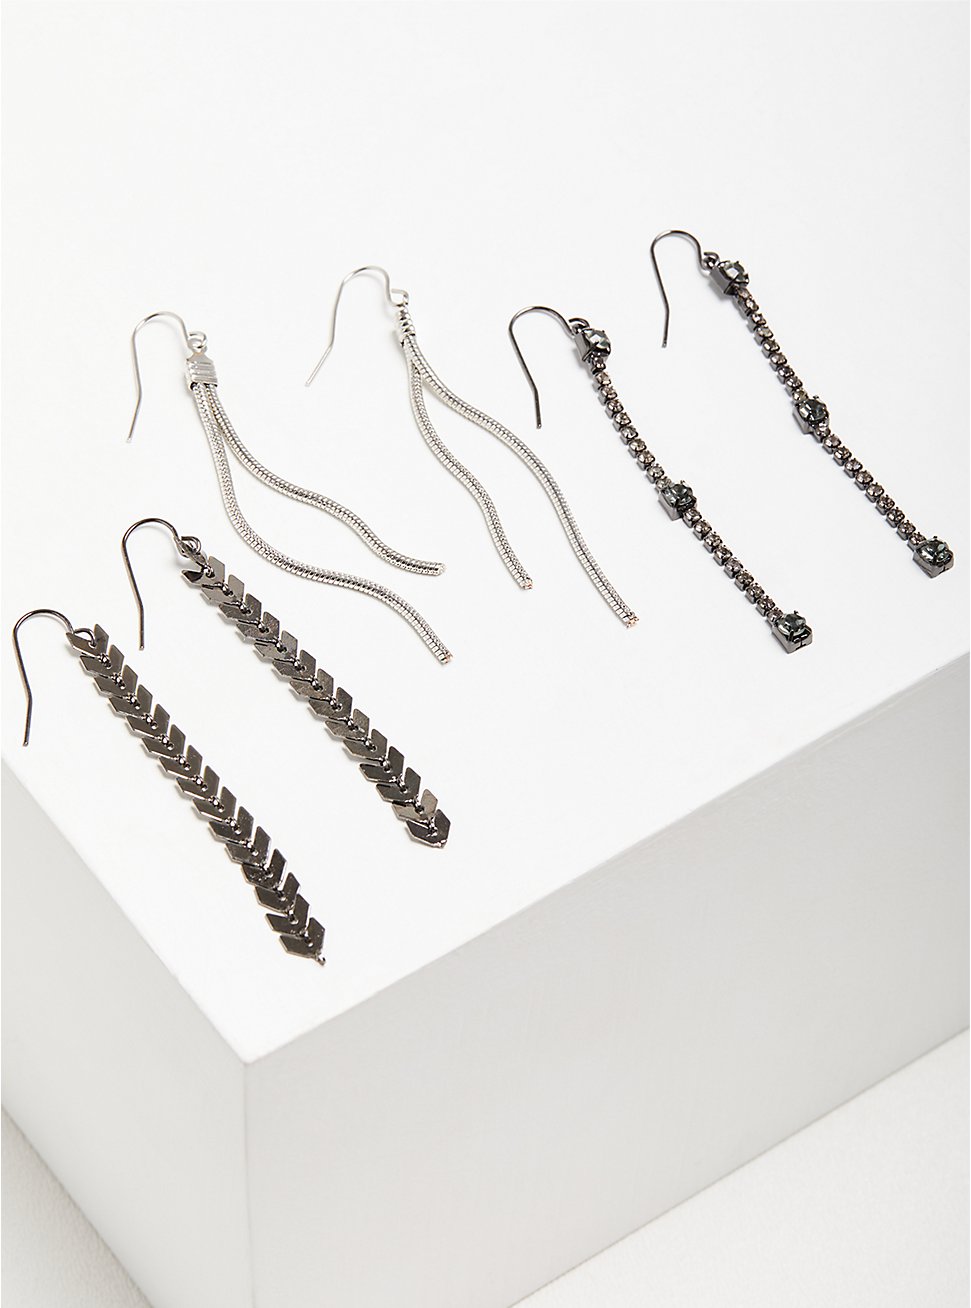 Plus Size Chain Linear Earring Set of 3 - Black & Silver Tone, , hi-res